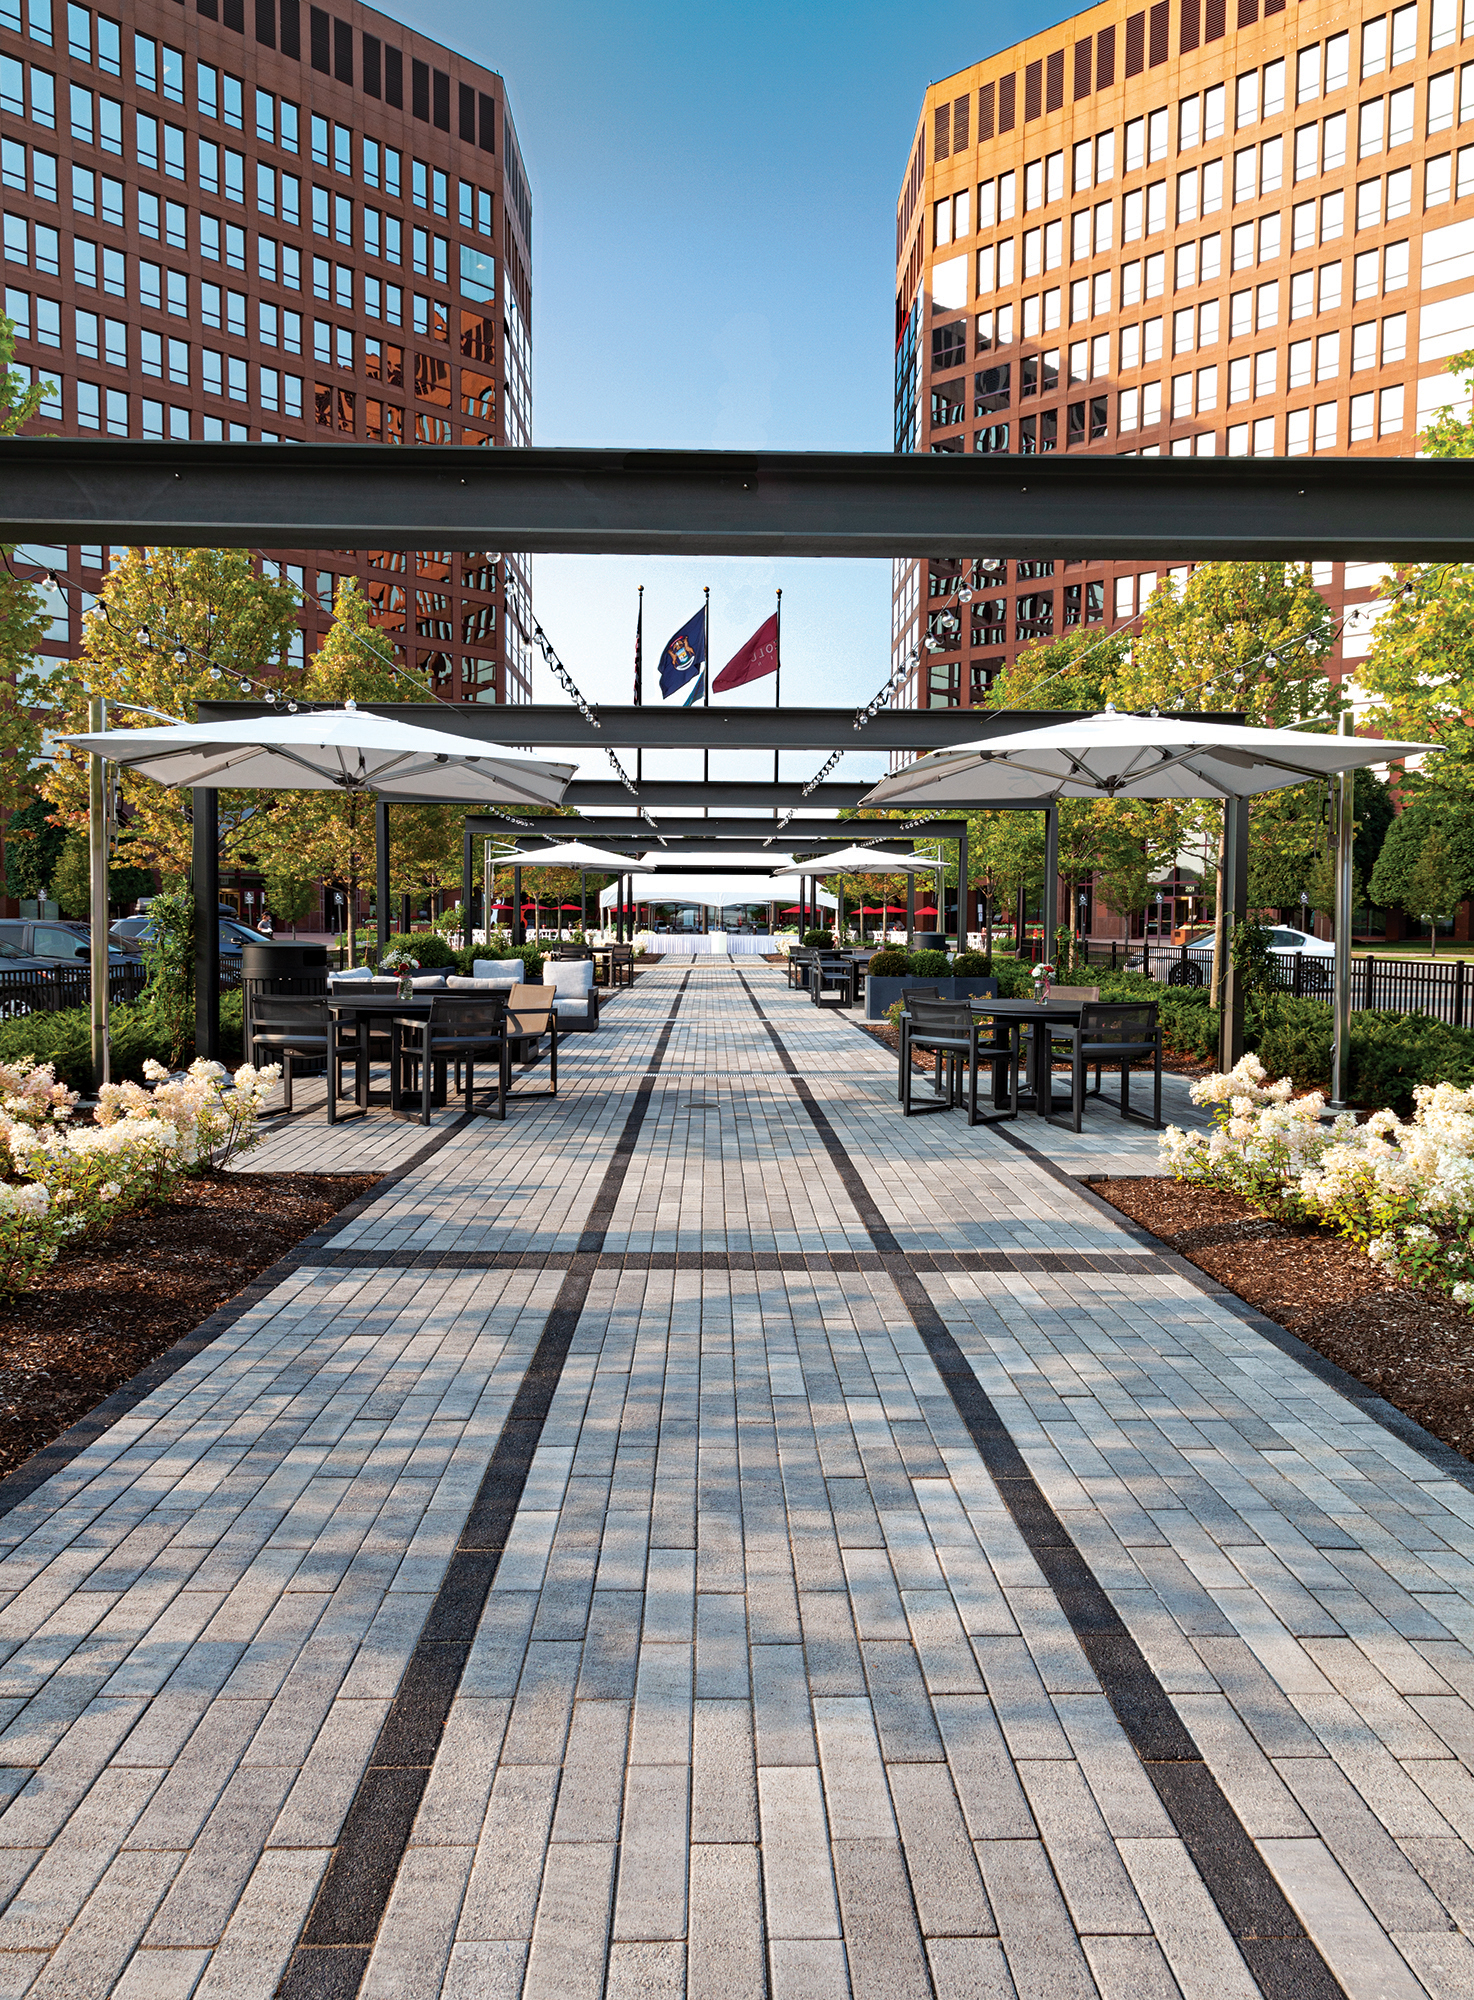 Two-toned Promenade Plank pavers create a walkway leading toward the building, with outdoor couches, tables and chairs for lounging.